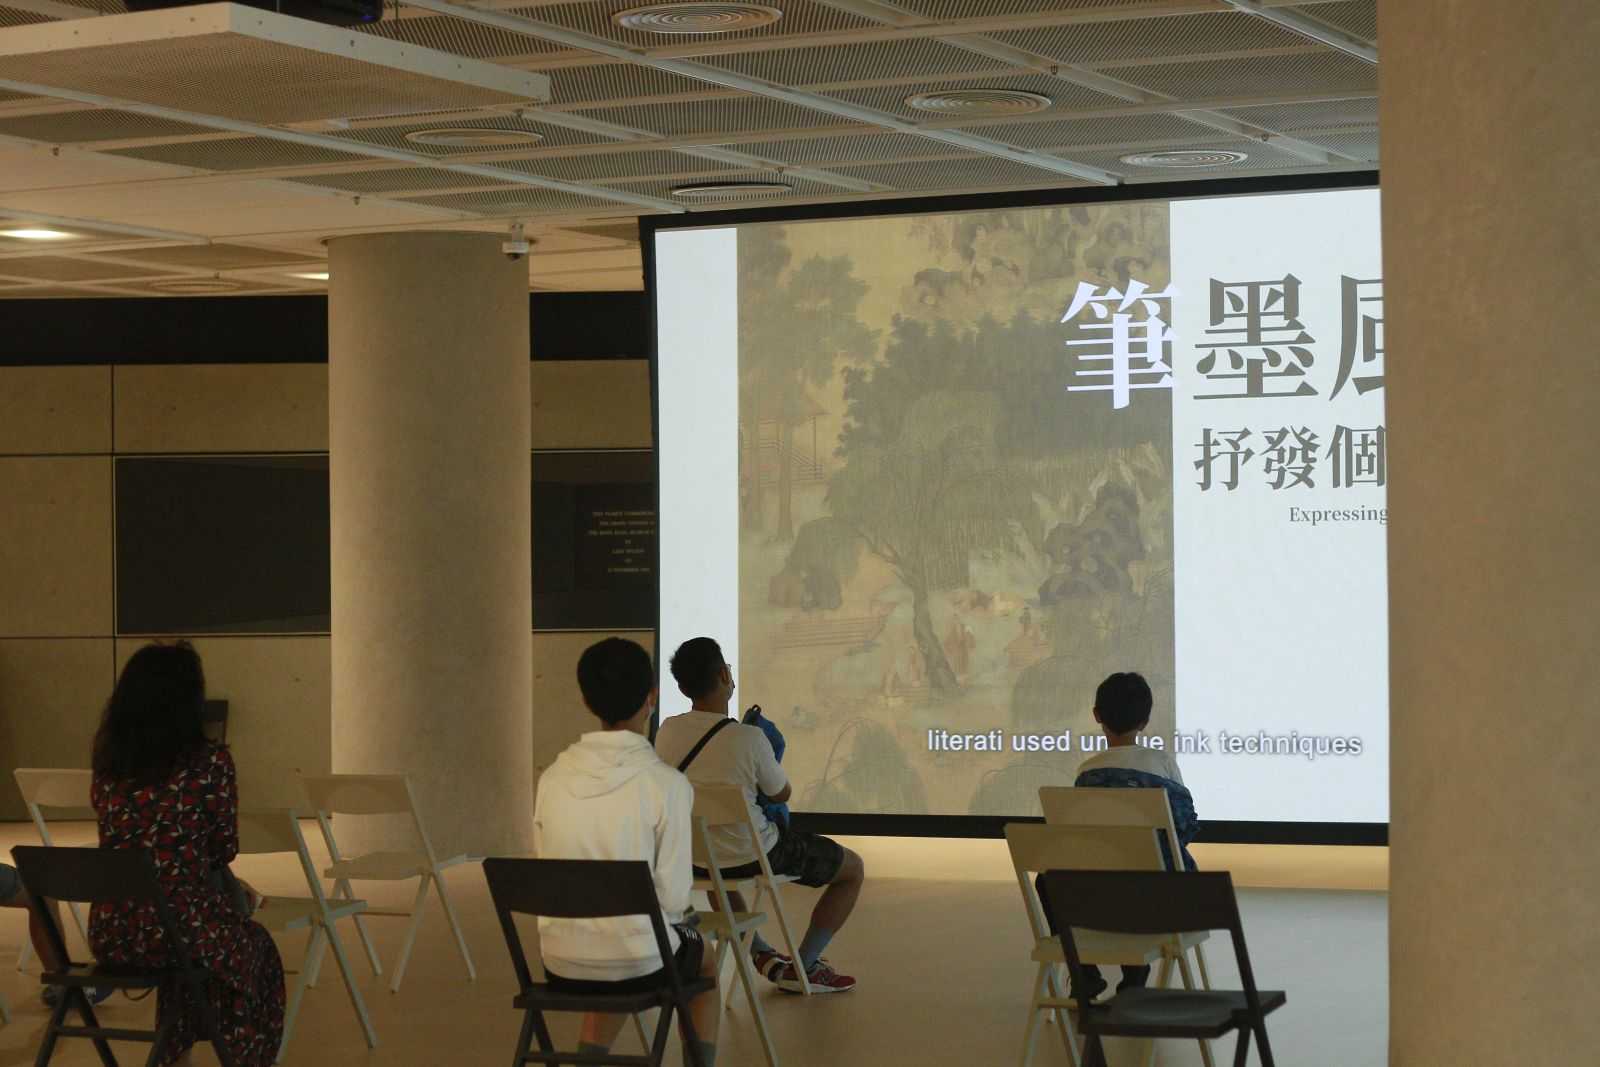 You can understand Chinese calligraphy in the exhibition